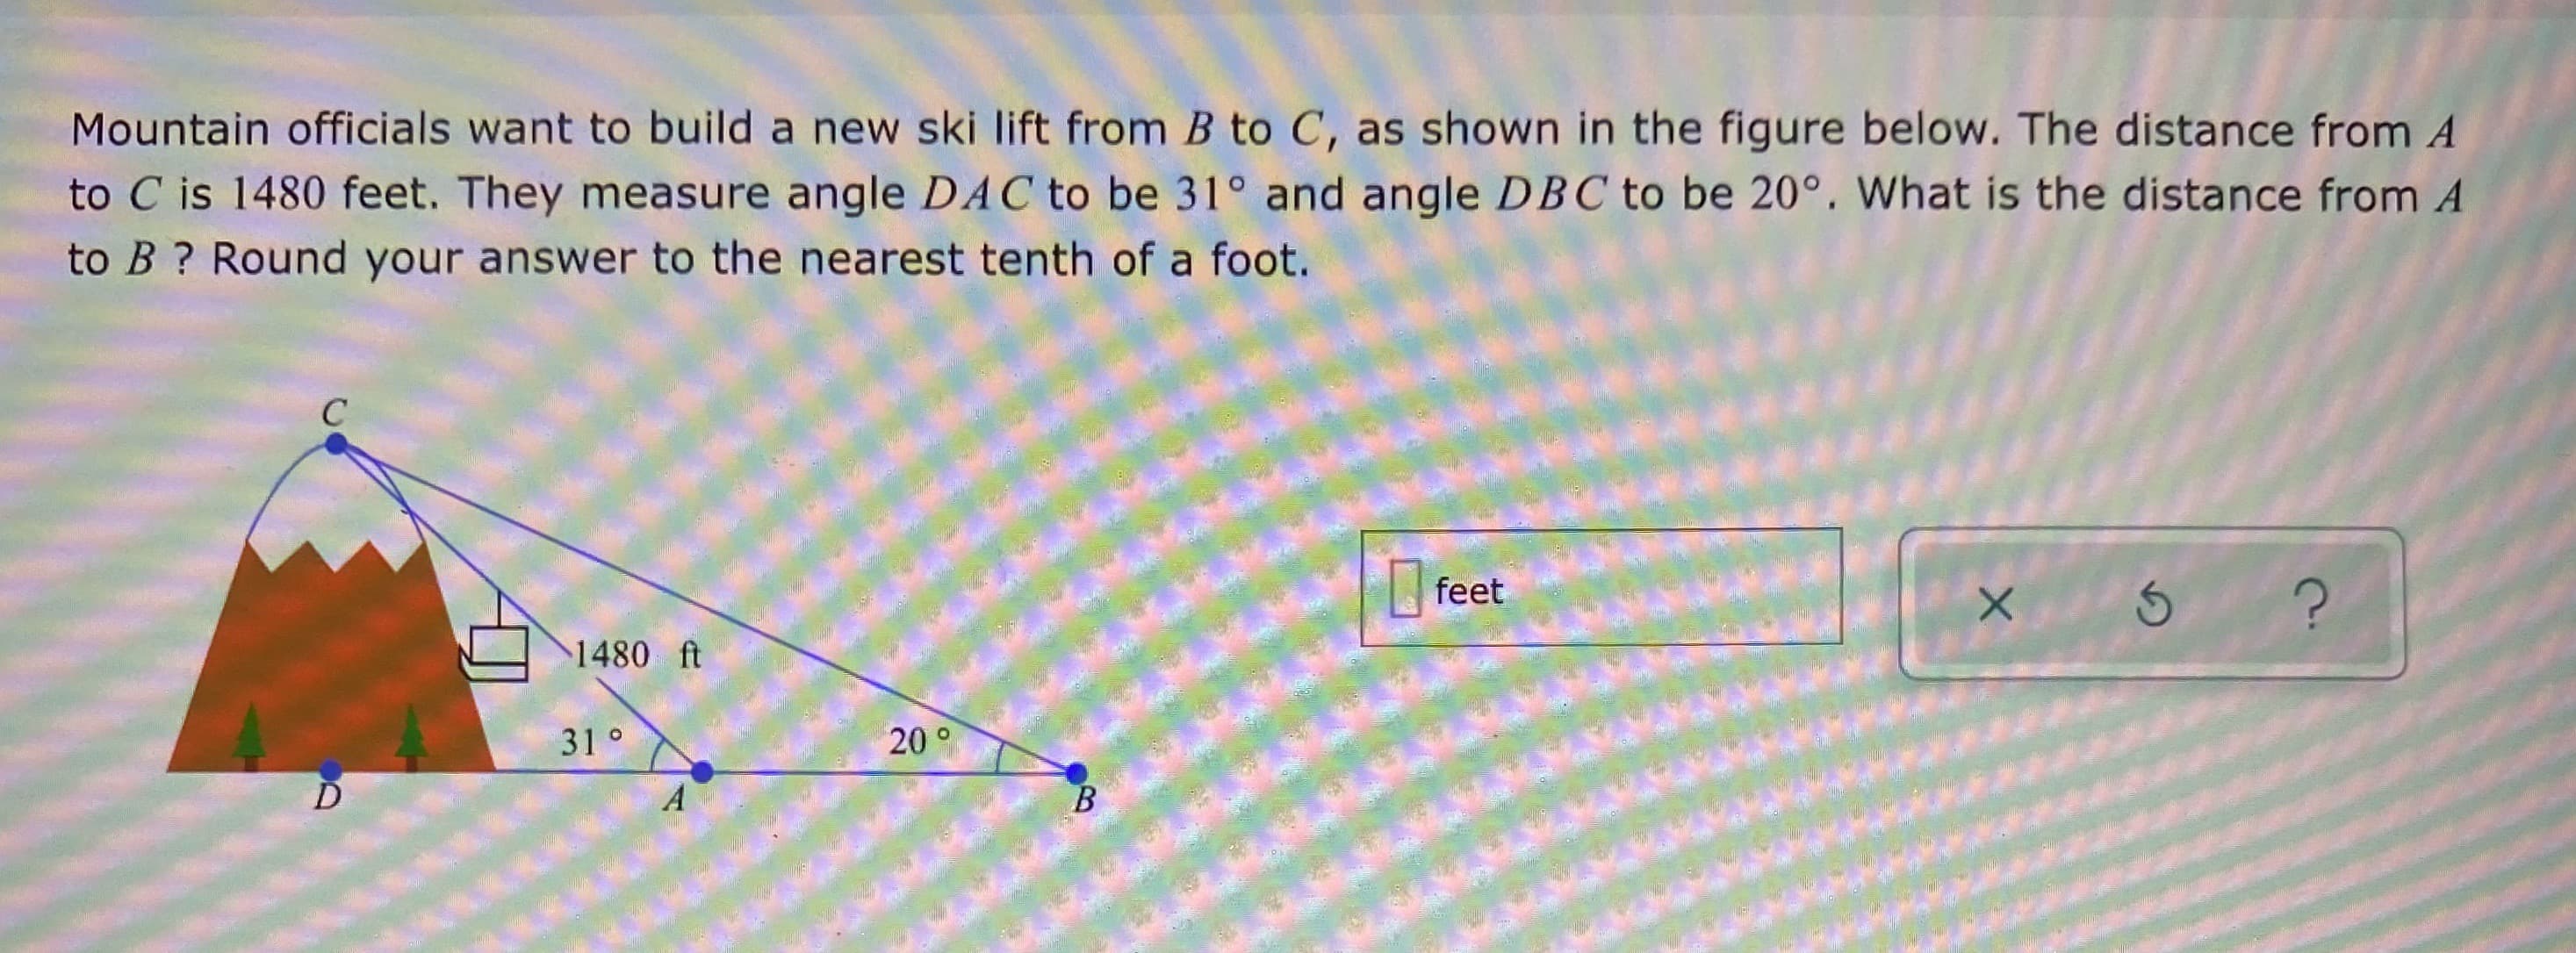 Mountain officials want to build a new ski lift from B to C, as shown in the figure below. The distance from A
to C is 1480 feet. They measure angle DAC to be 31° and angle DBC to be 20°. What is the distance from A
to B ? Round your answer to the nearest tenth of a foot.
feet
1480 ft
31°
20°
D
B.
